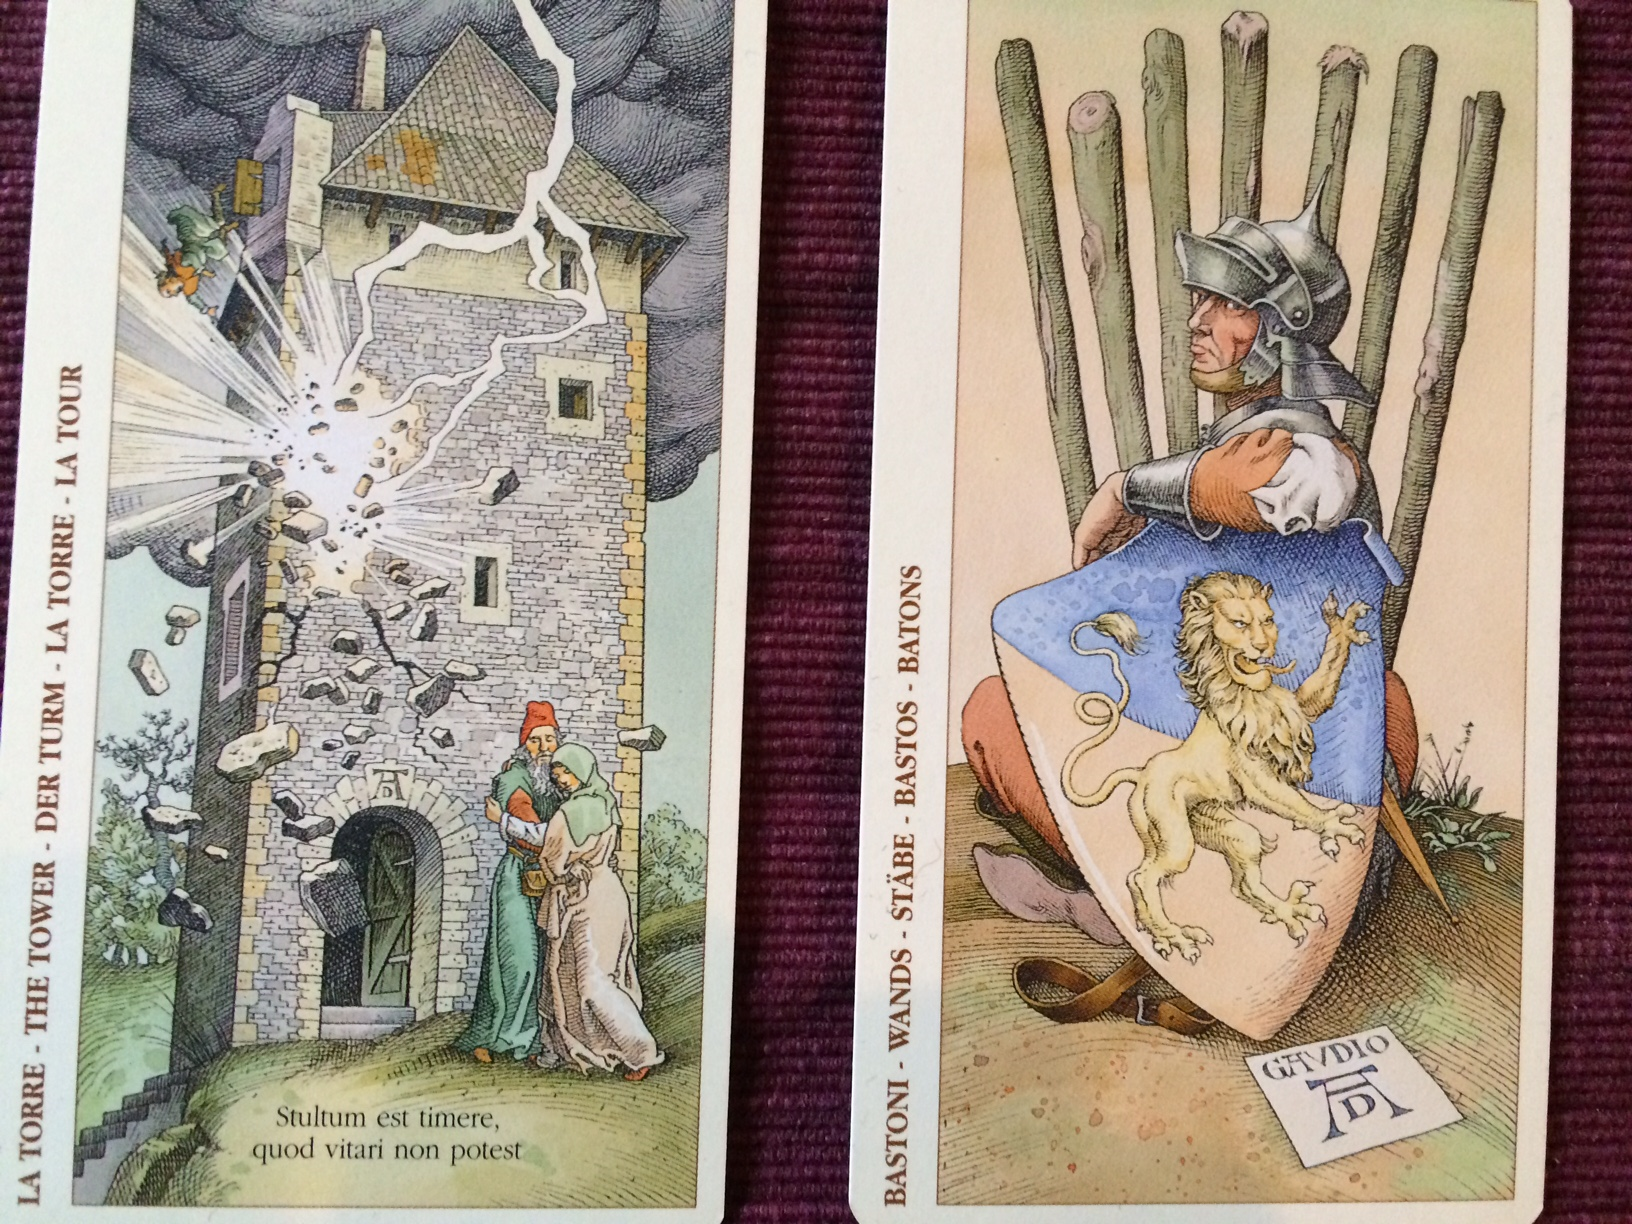 The Tower and Seven of Wands cards from the "Tarot of Durer" by Lo Scarabeo.